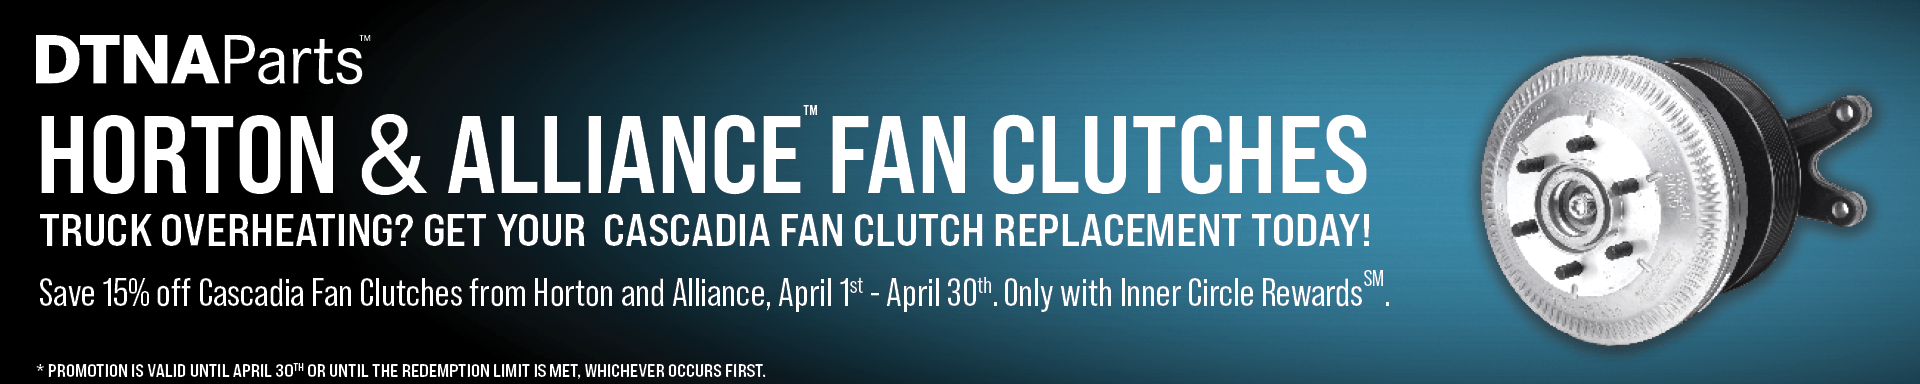 Save 15% off Cascadia fan clutches from Horton and Alliance, April 1st - 30th